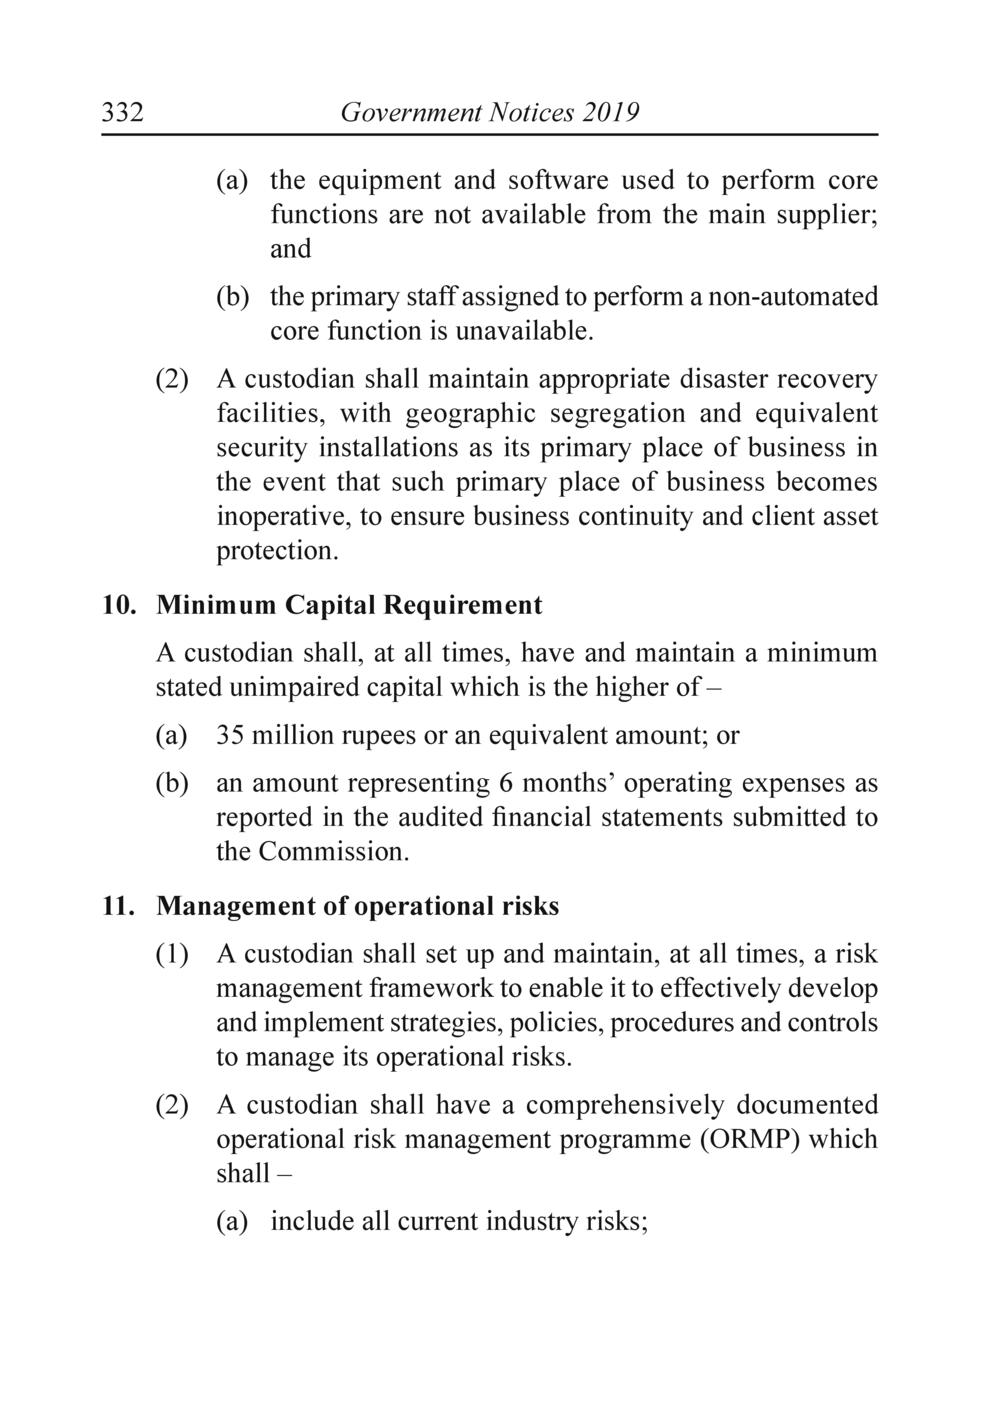 FSC Rules made by the Financial Services Commission under section 93 of the Financial Services Act